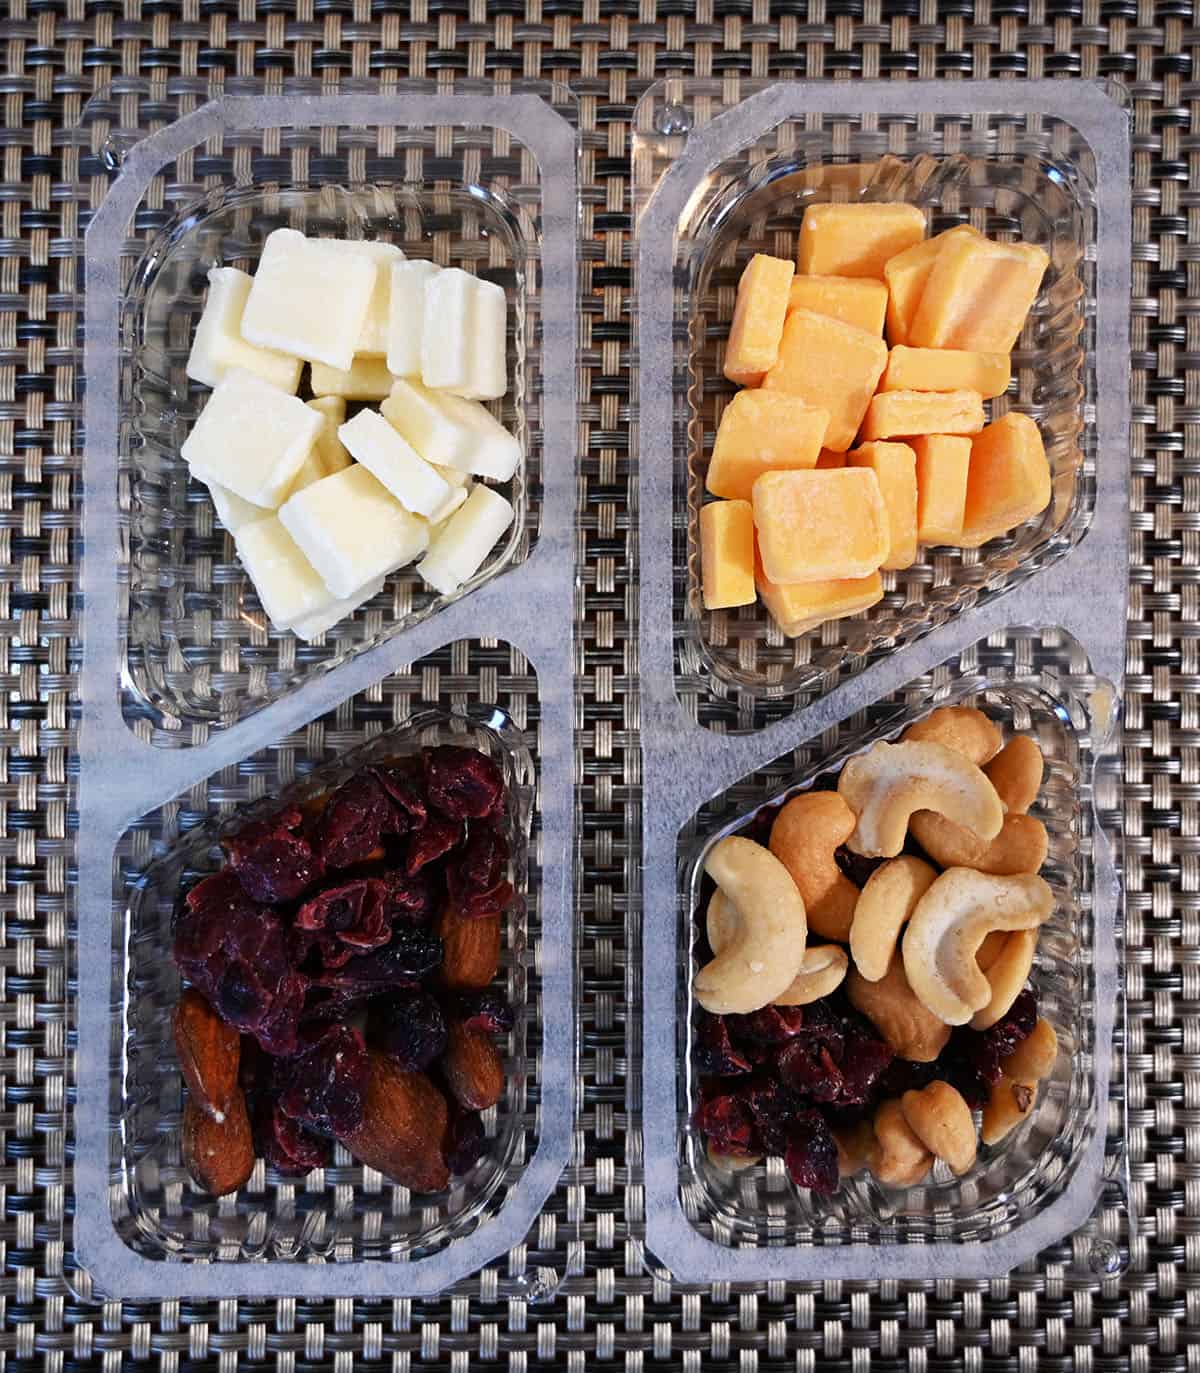 Top down image of the two kinds of cheese, fruit and nut packs open so you can see the contents in the two packs.